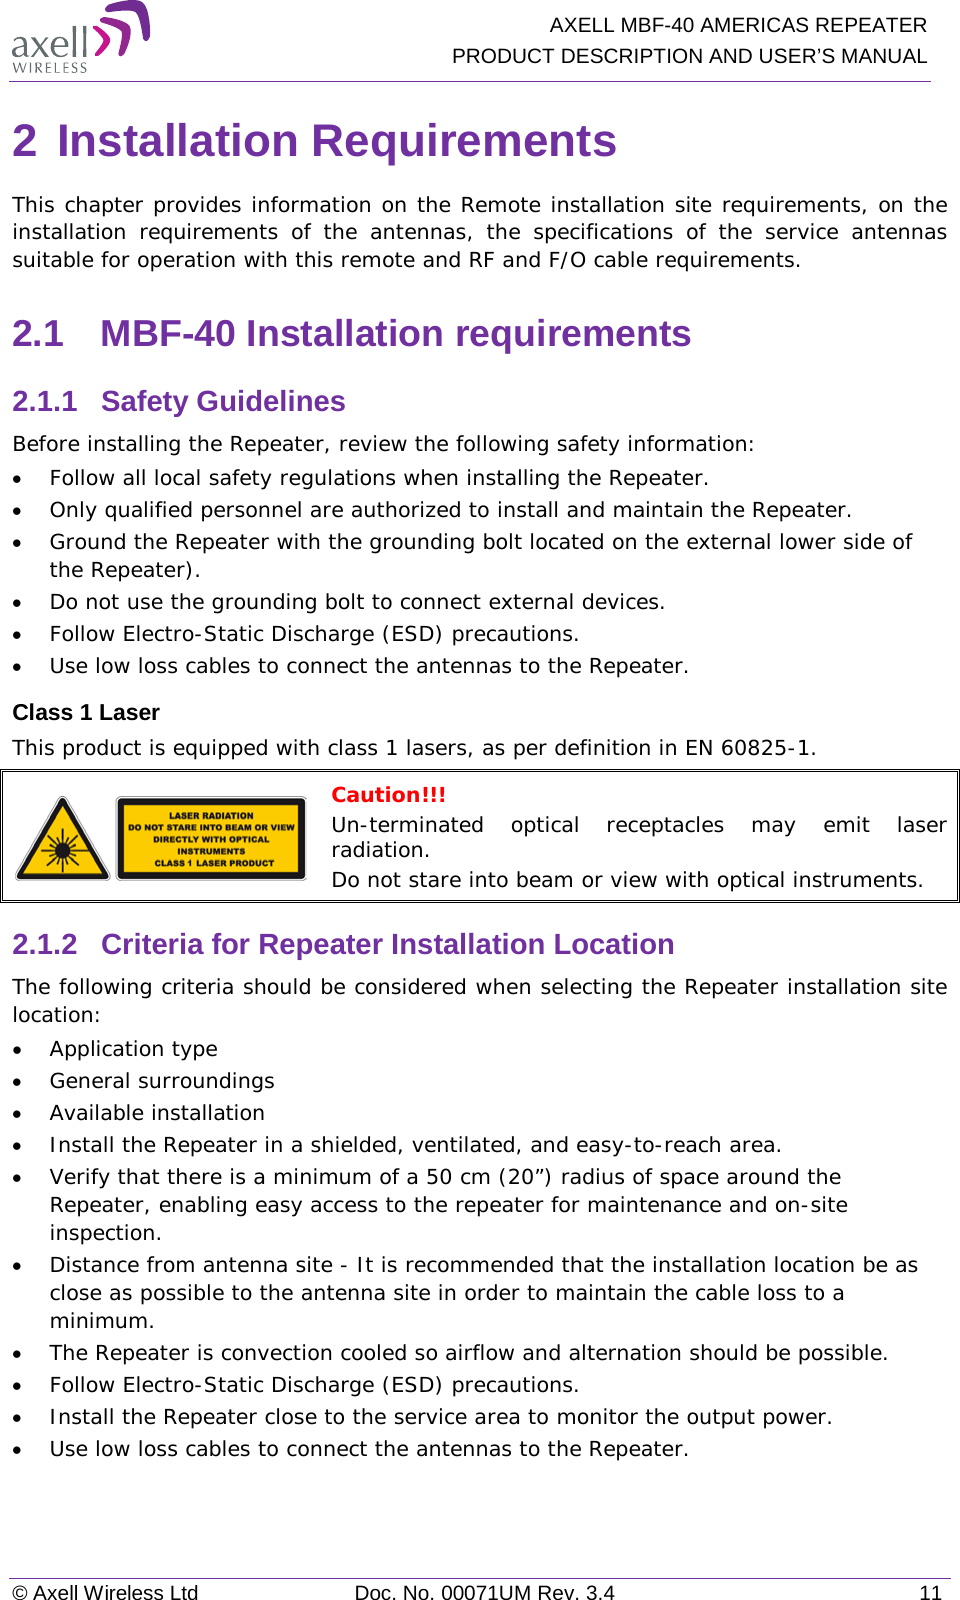   AXELL MBF-40 AMERICAS REPEATER PRODUCT DESCRIPTION AND USER’S MANUAL © Axell Wireless Ltd Doc. No. 00071UM Rev. 3.4 11 2 Installation Requirements This chapter provides information on the Remote installation site requirements, on the installation requirements of the antennas,  the specifications of the service antennas suitable for operation with this remote and RF and F/O cable requirements. 2.1  MBF-40 Installation requirements 2.1.1  Safety Guidelines Before installing the Repeater, review the following safety information:  • Follow all local safety regulations when installing the Repeater. • Only qualified personnel are authorized to install and maintain the Repeater. • Ground the Repeater with the grounding bolt located on the external lower side of the Repeater). • Do not use the grounding bolt to connect external devices. • Follow Electro-Static Discharge (ESD) precautions. • Use low loss cables to connect the antennas to the Repeater. Class 1 Laser This product is equipped with class 1 lasers, as per definition in EN 60825-1.   Caution!!! Un-terminated optical receptacles may emit laser radiation. Do not stare into beam or view with optical instruments. 2.1.2  Criteria for Repeater Installation Location The following criteria should be considered when selecting the Repeater installation site location: • Application type • General surroundings • Available installation • Install the Repeater in a shielded, ventilated, and easy-to-reach area. • Verify that there is a minimum of a 50 cm (20”) radius of space around the Repeater, enabling easy access to the repeater for maintenance and on-site inspection. • Distance from antenna site - It is recommended that the installation location be as close as possible to the antenna site in order to maintain the cable loss to a minimum. • The Repeater is convection cooled so airflow and alternation should be possible. • Follow Electro-Static Discharge (ESD) precautions. • Install the Repeater close to the service area to monitor the output power. • Use low loss cables to connect the antennas to the Repeater. 